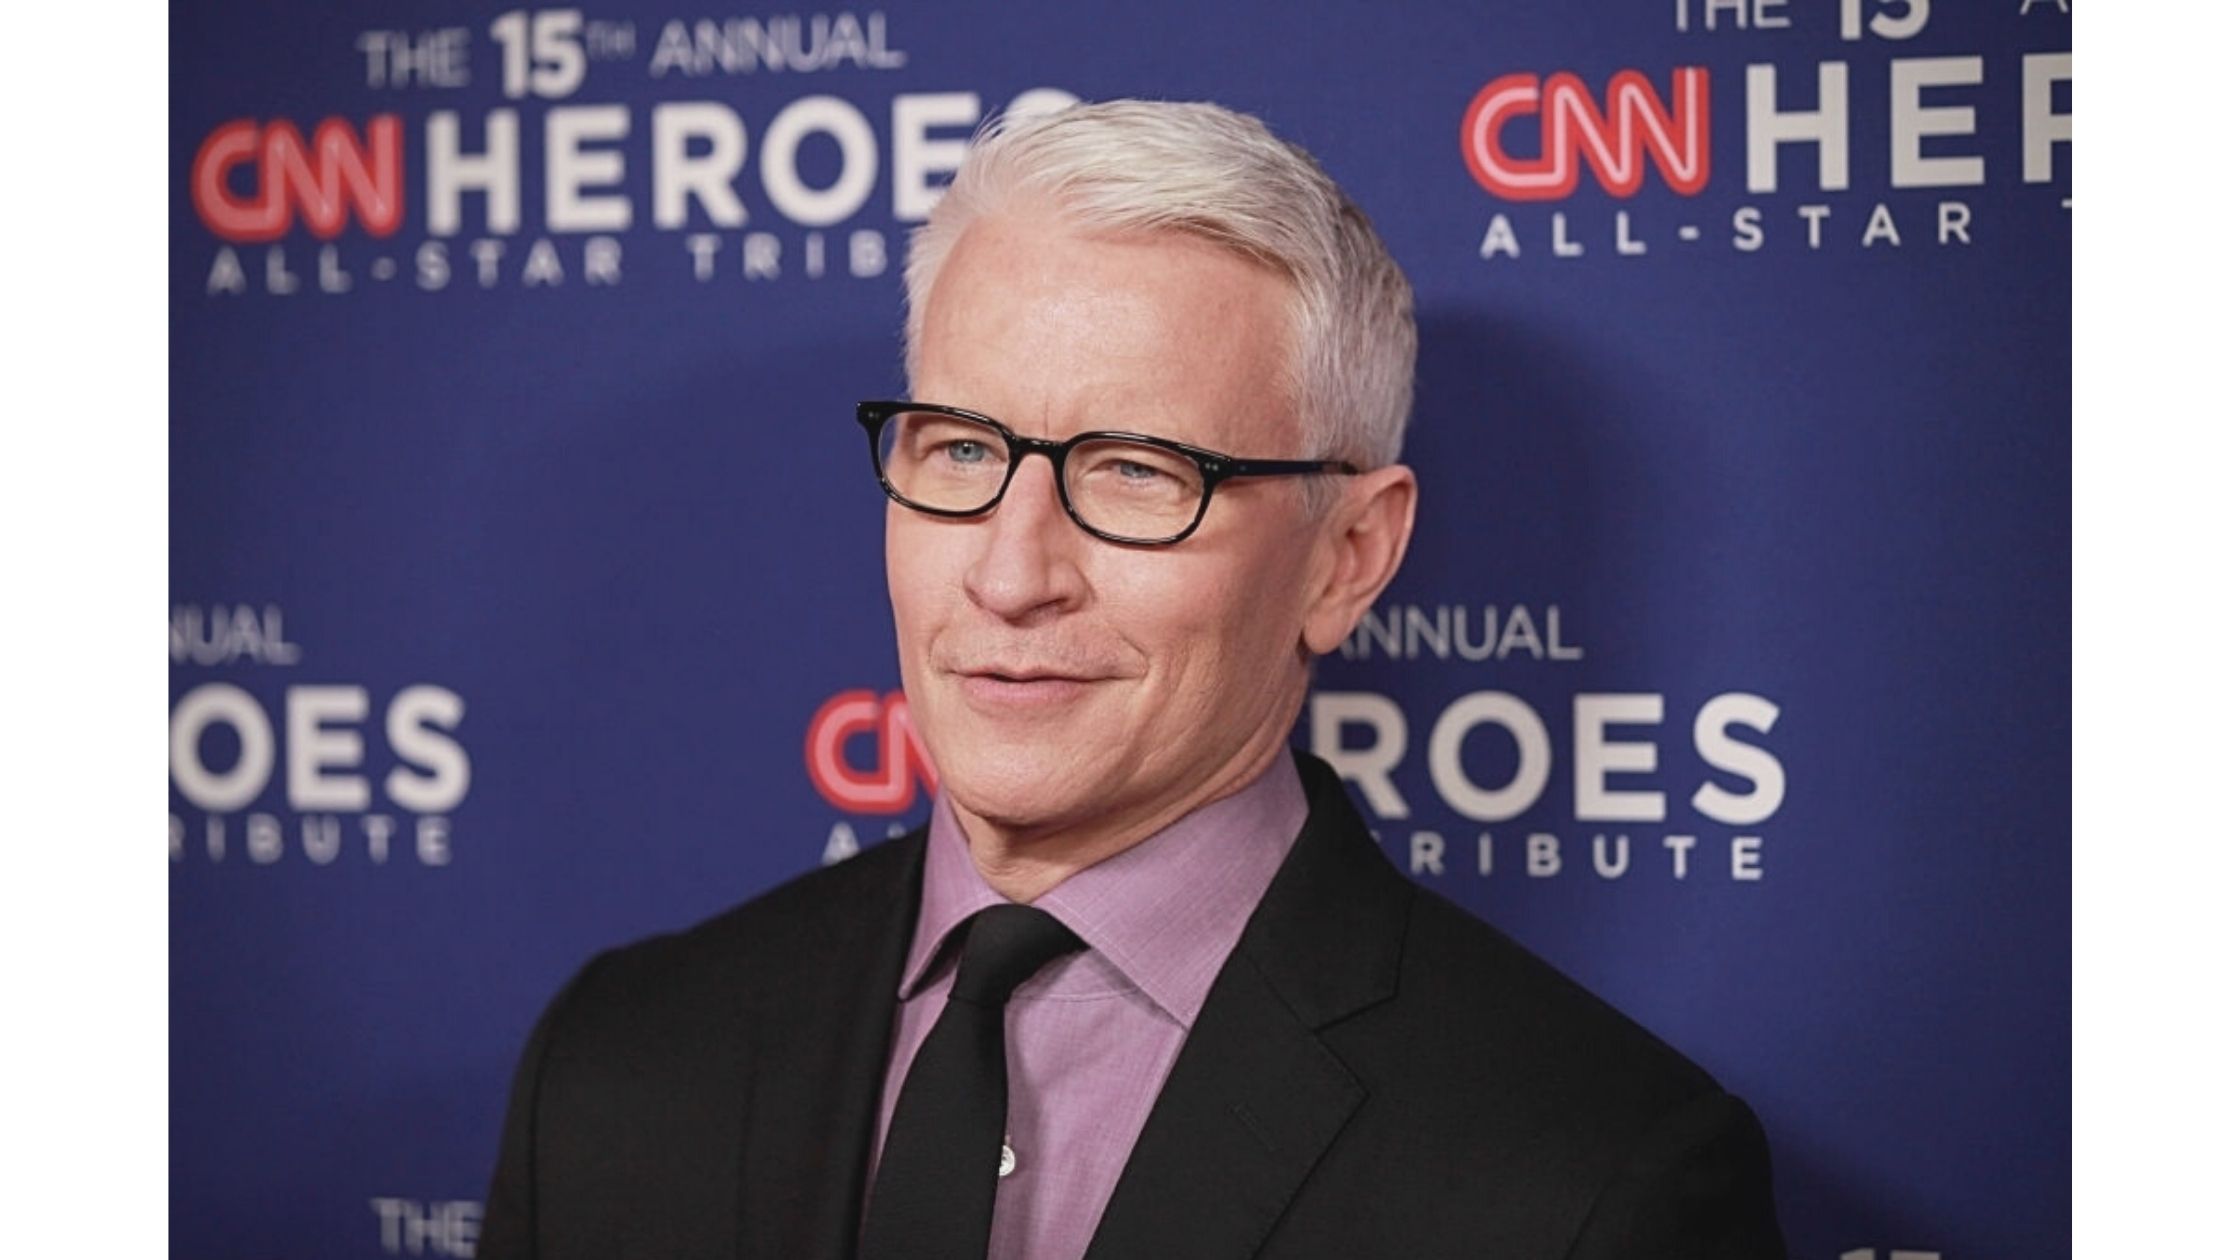 Anderson-Cooper-Announces-That-He-Has-Become-A-Father-Again-Welcomes-His-Second-Child-Sebastian-Luke-Maisani-Cooper-Anderson-Cooper-And-Benjamin-Maisani-Relationship